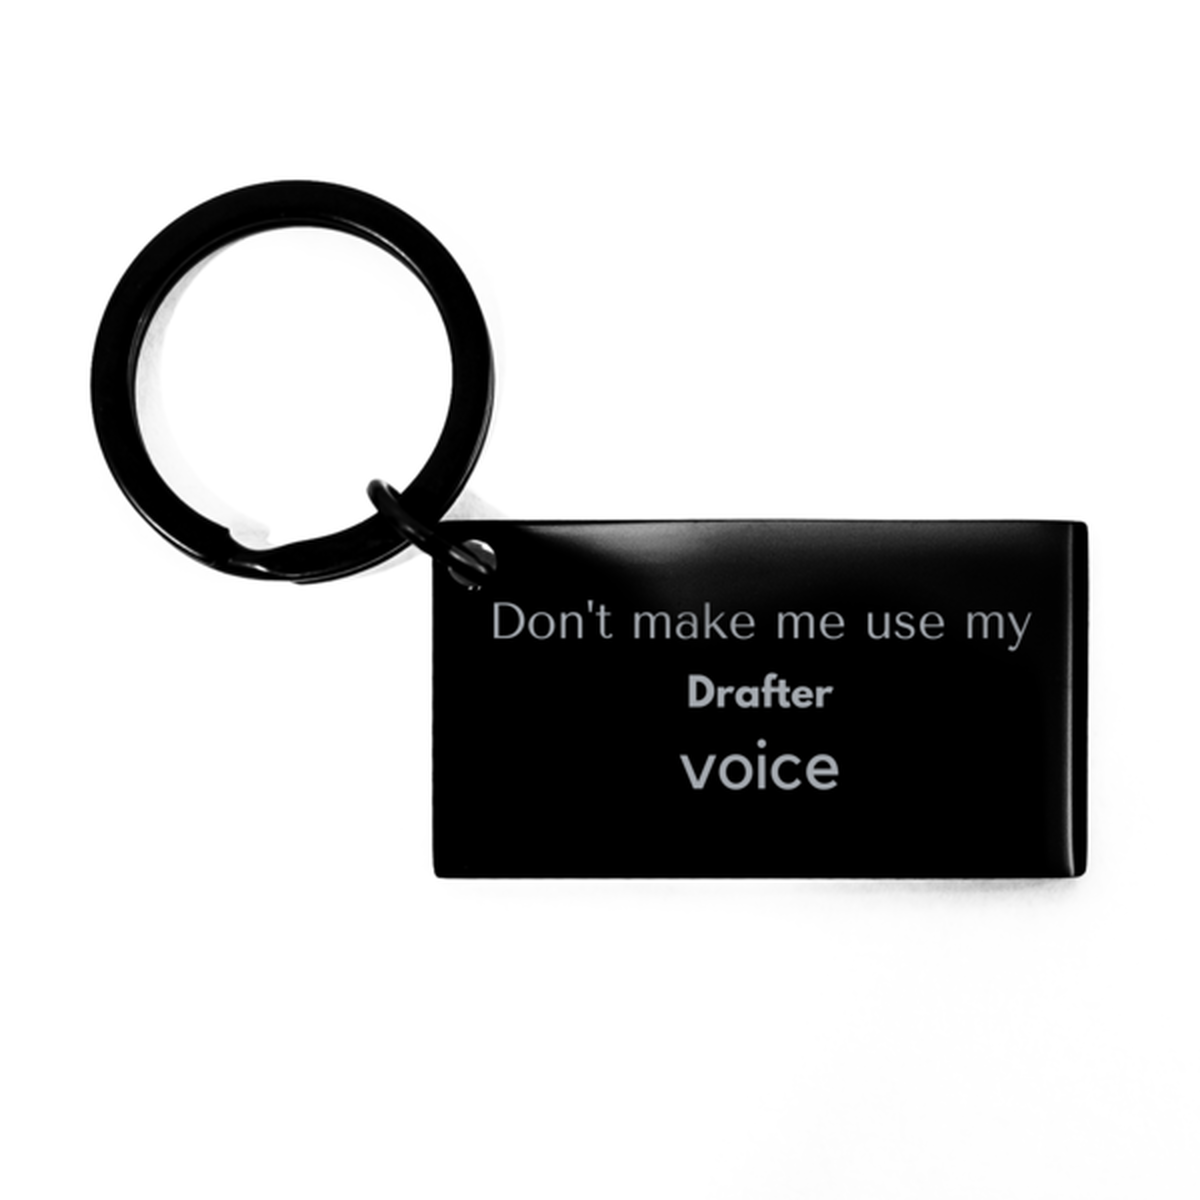 Don't make me use my Drafter voice, Sarcasm Drafter Gifts, Christmas Drafter Keychain Birthday Unique Gifts For Drafter Coworkers, Men, Women, Colleague, Friends